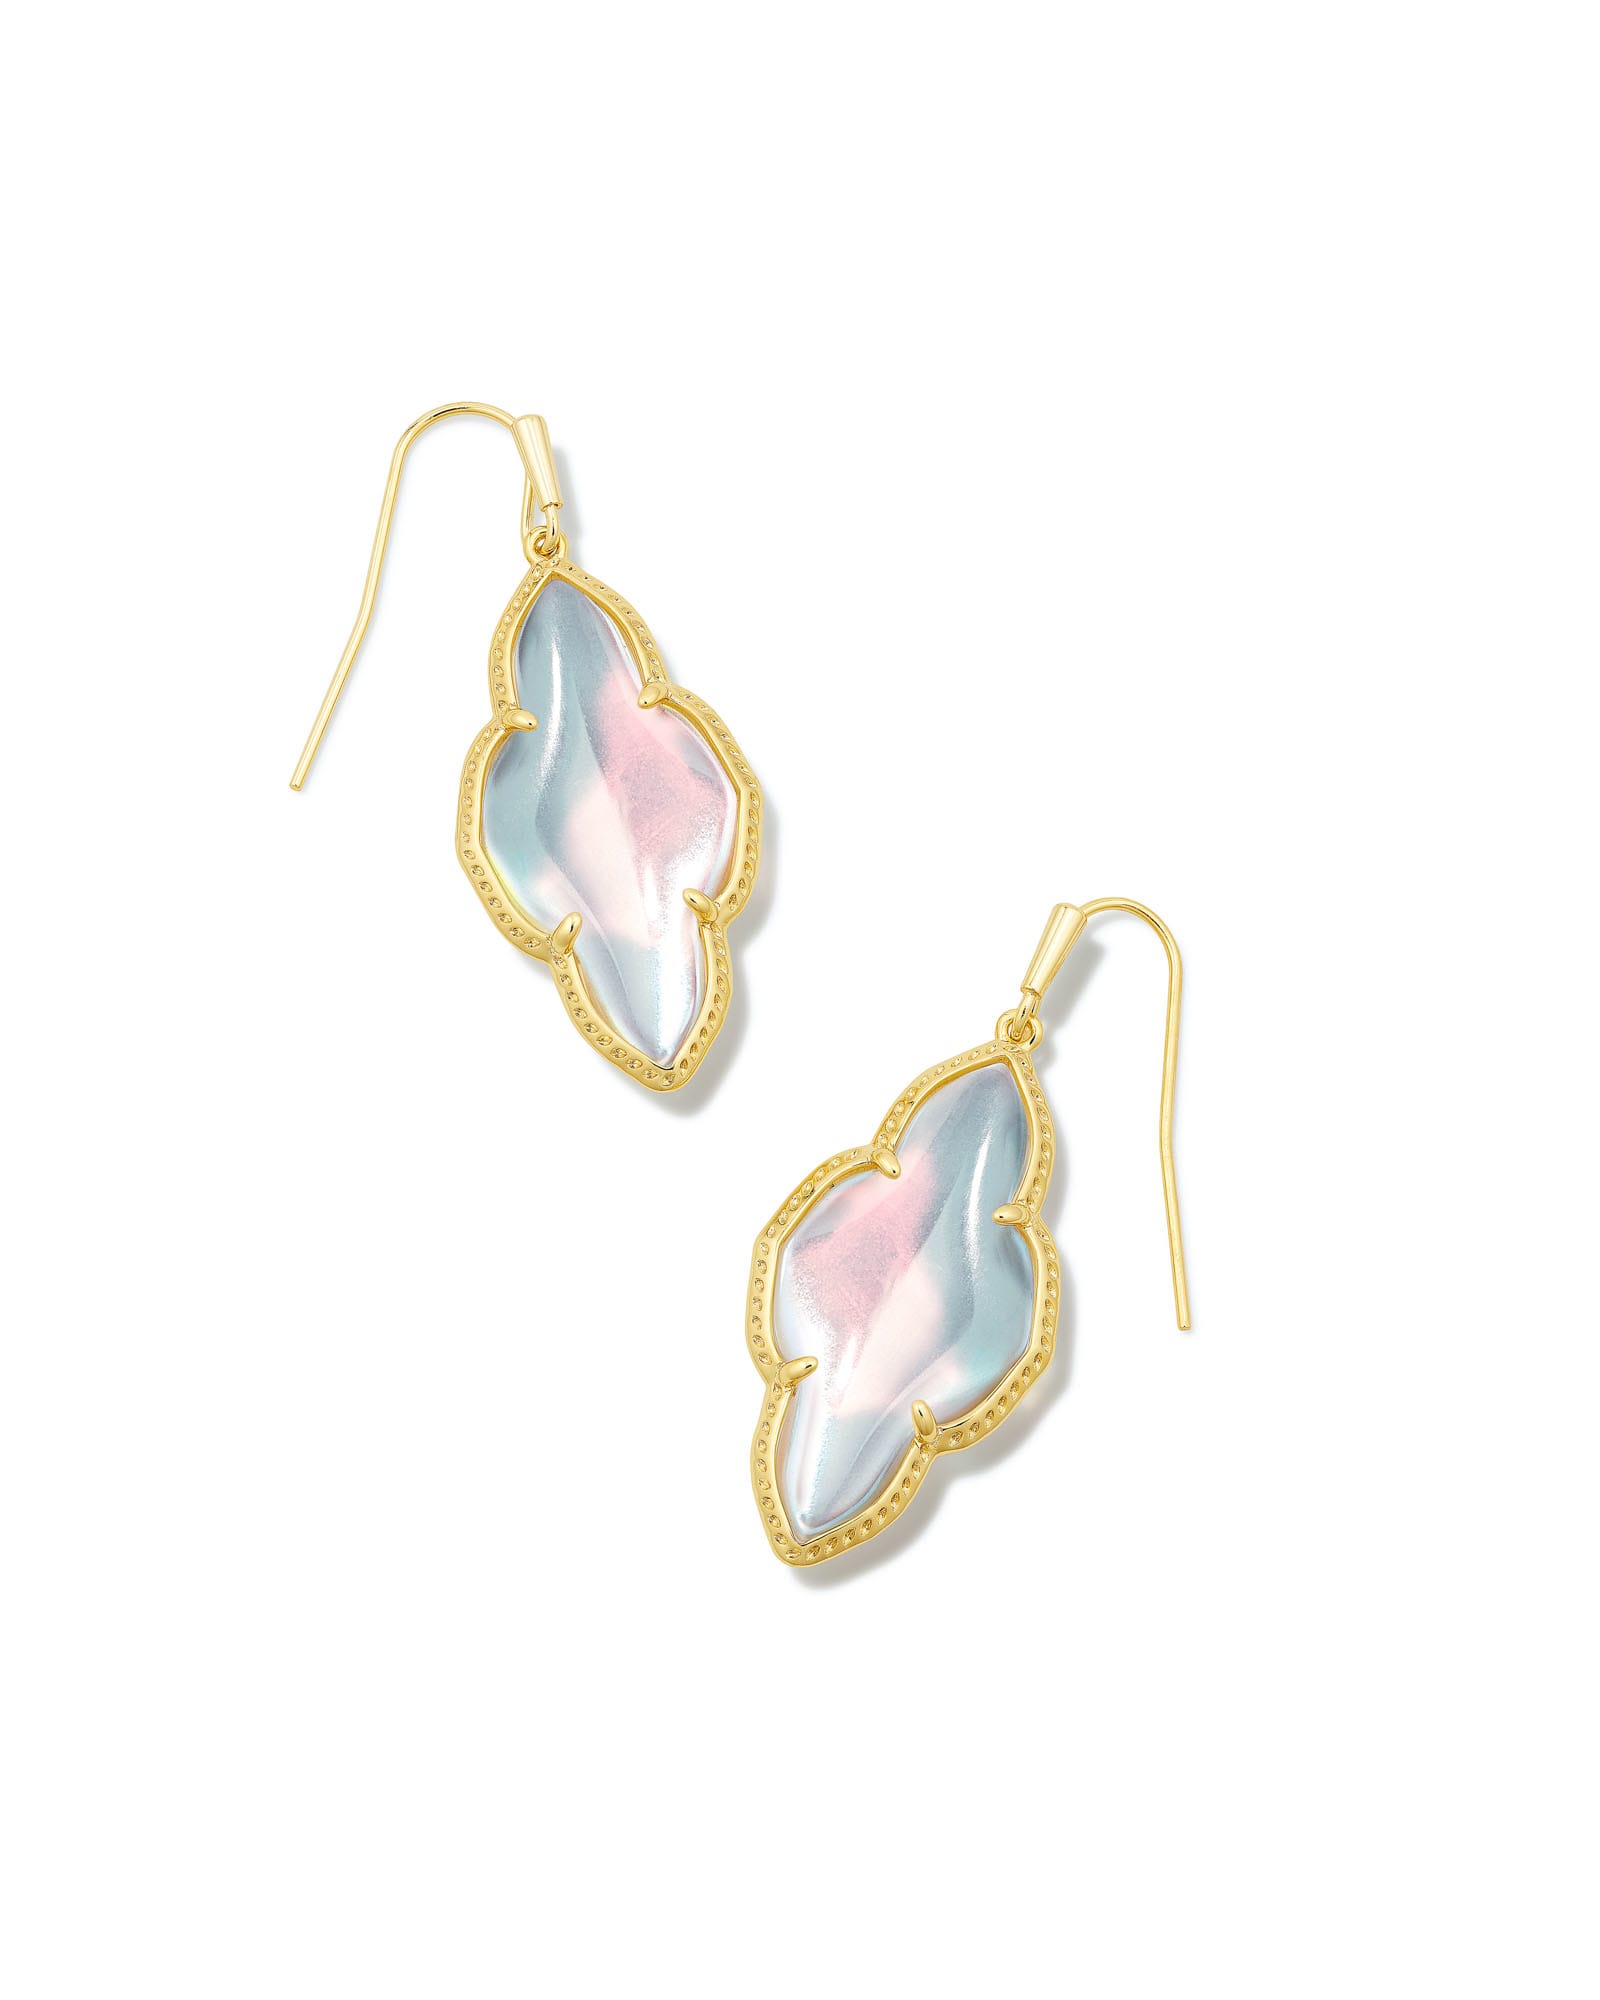 Kendra Scott 14k White Gold Sophia Drop Earrings With Pave Diamonds — Otra Vez  Couture Consignment